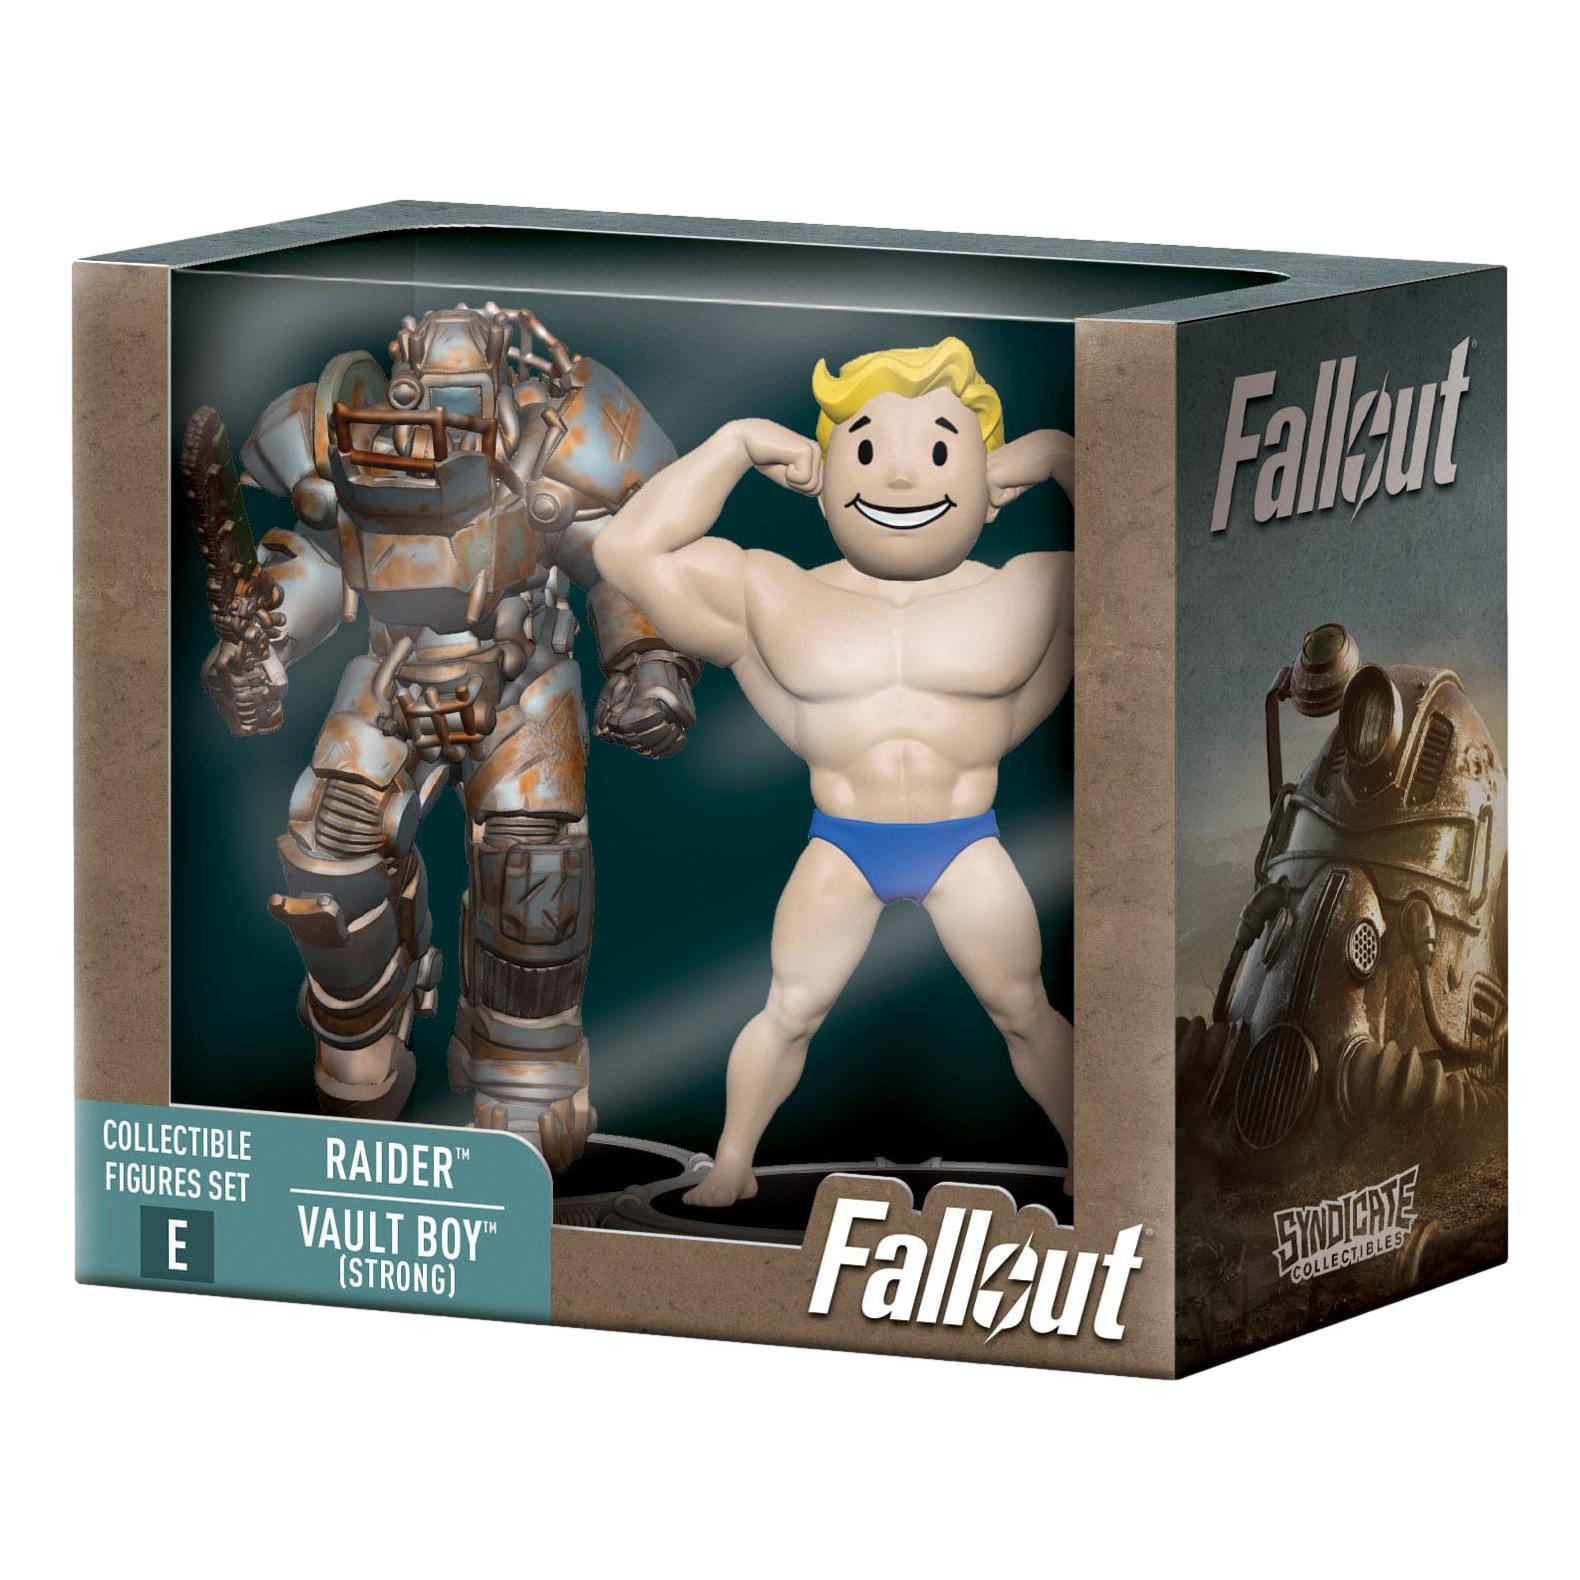 Fallout: Raider & Vault Boy (Strong): 3" Mini Figure Set E: (Deathclaw BAF) Syndicate Collectibles